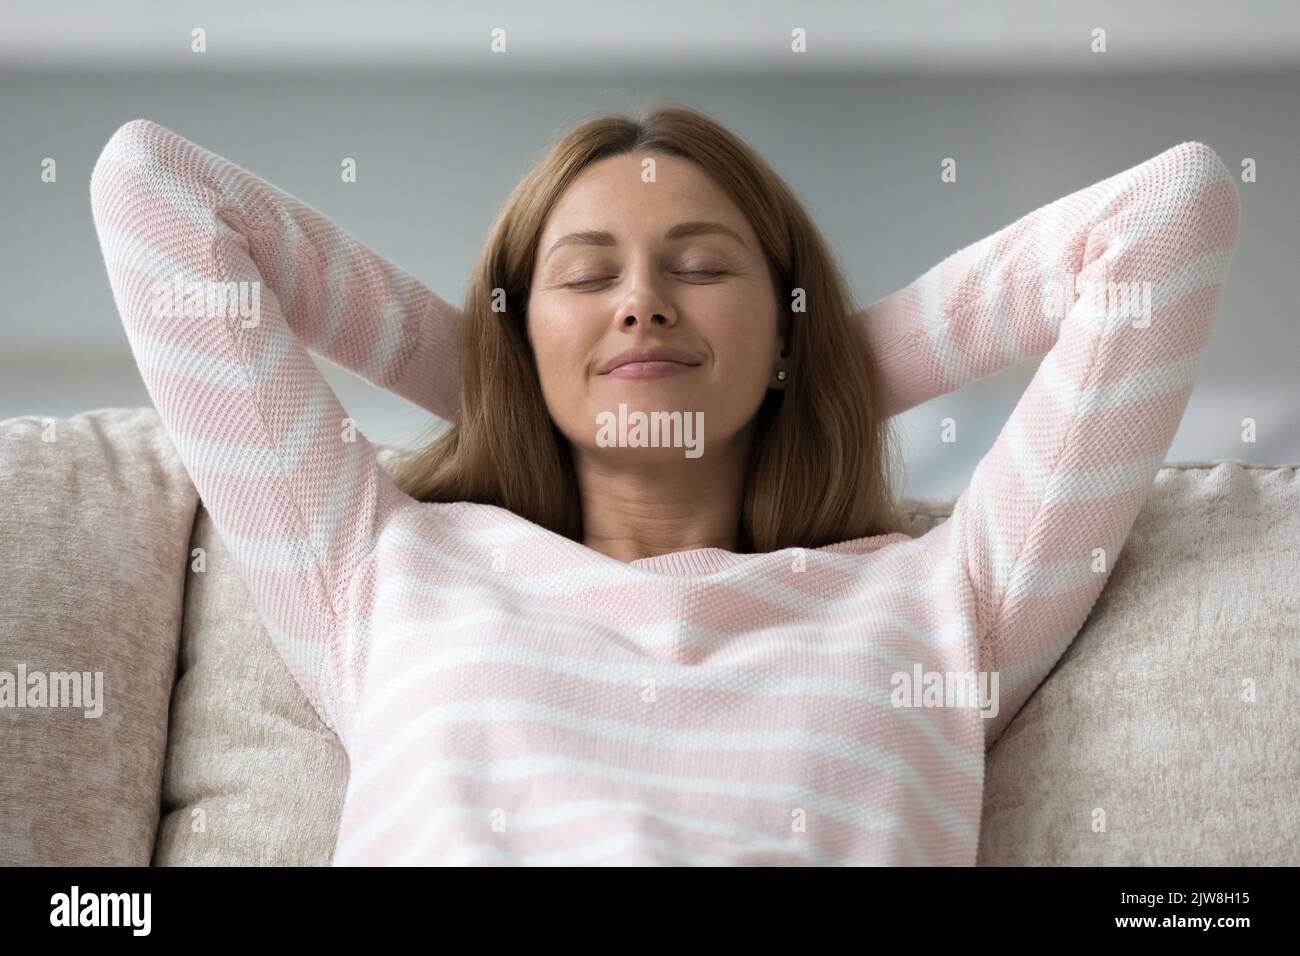 Peaceful happy pretty 30s woman relaxing on couch Stock Photo